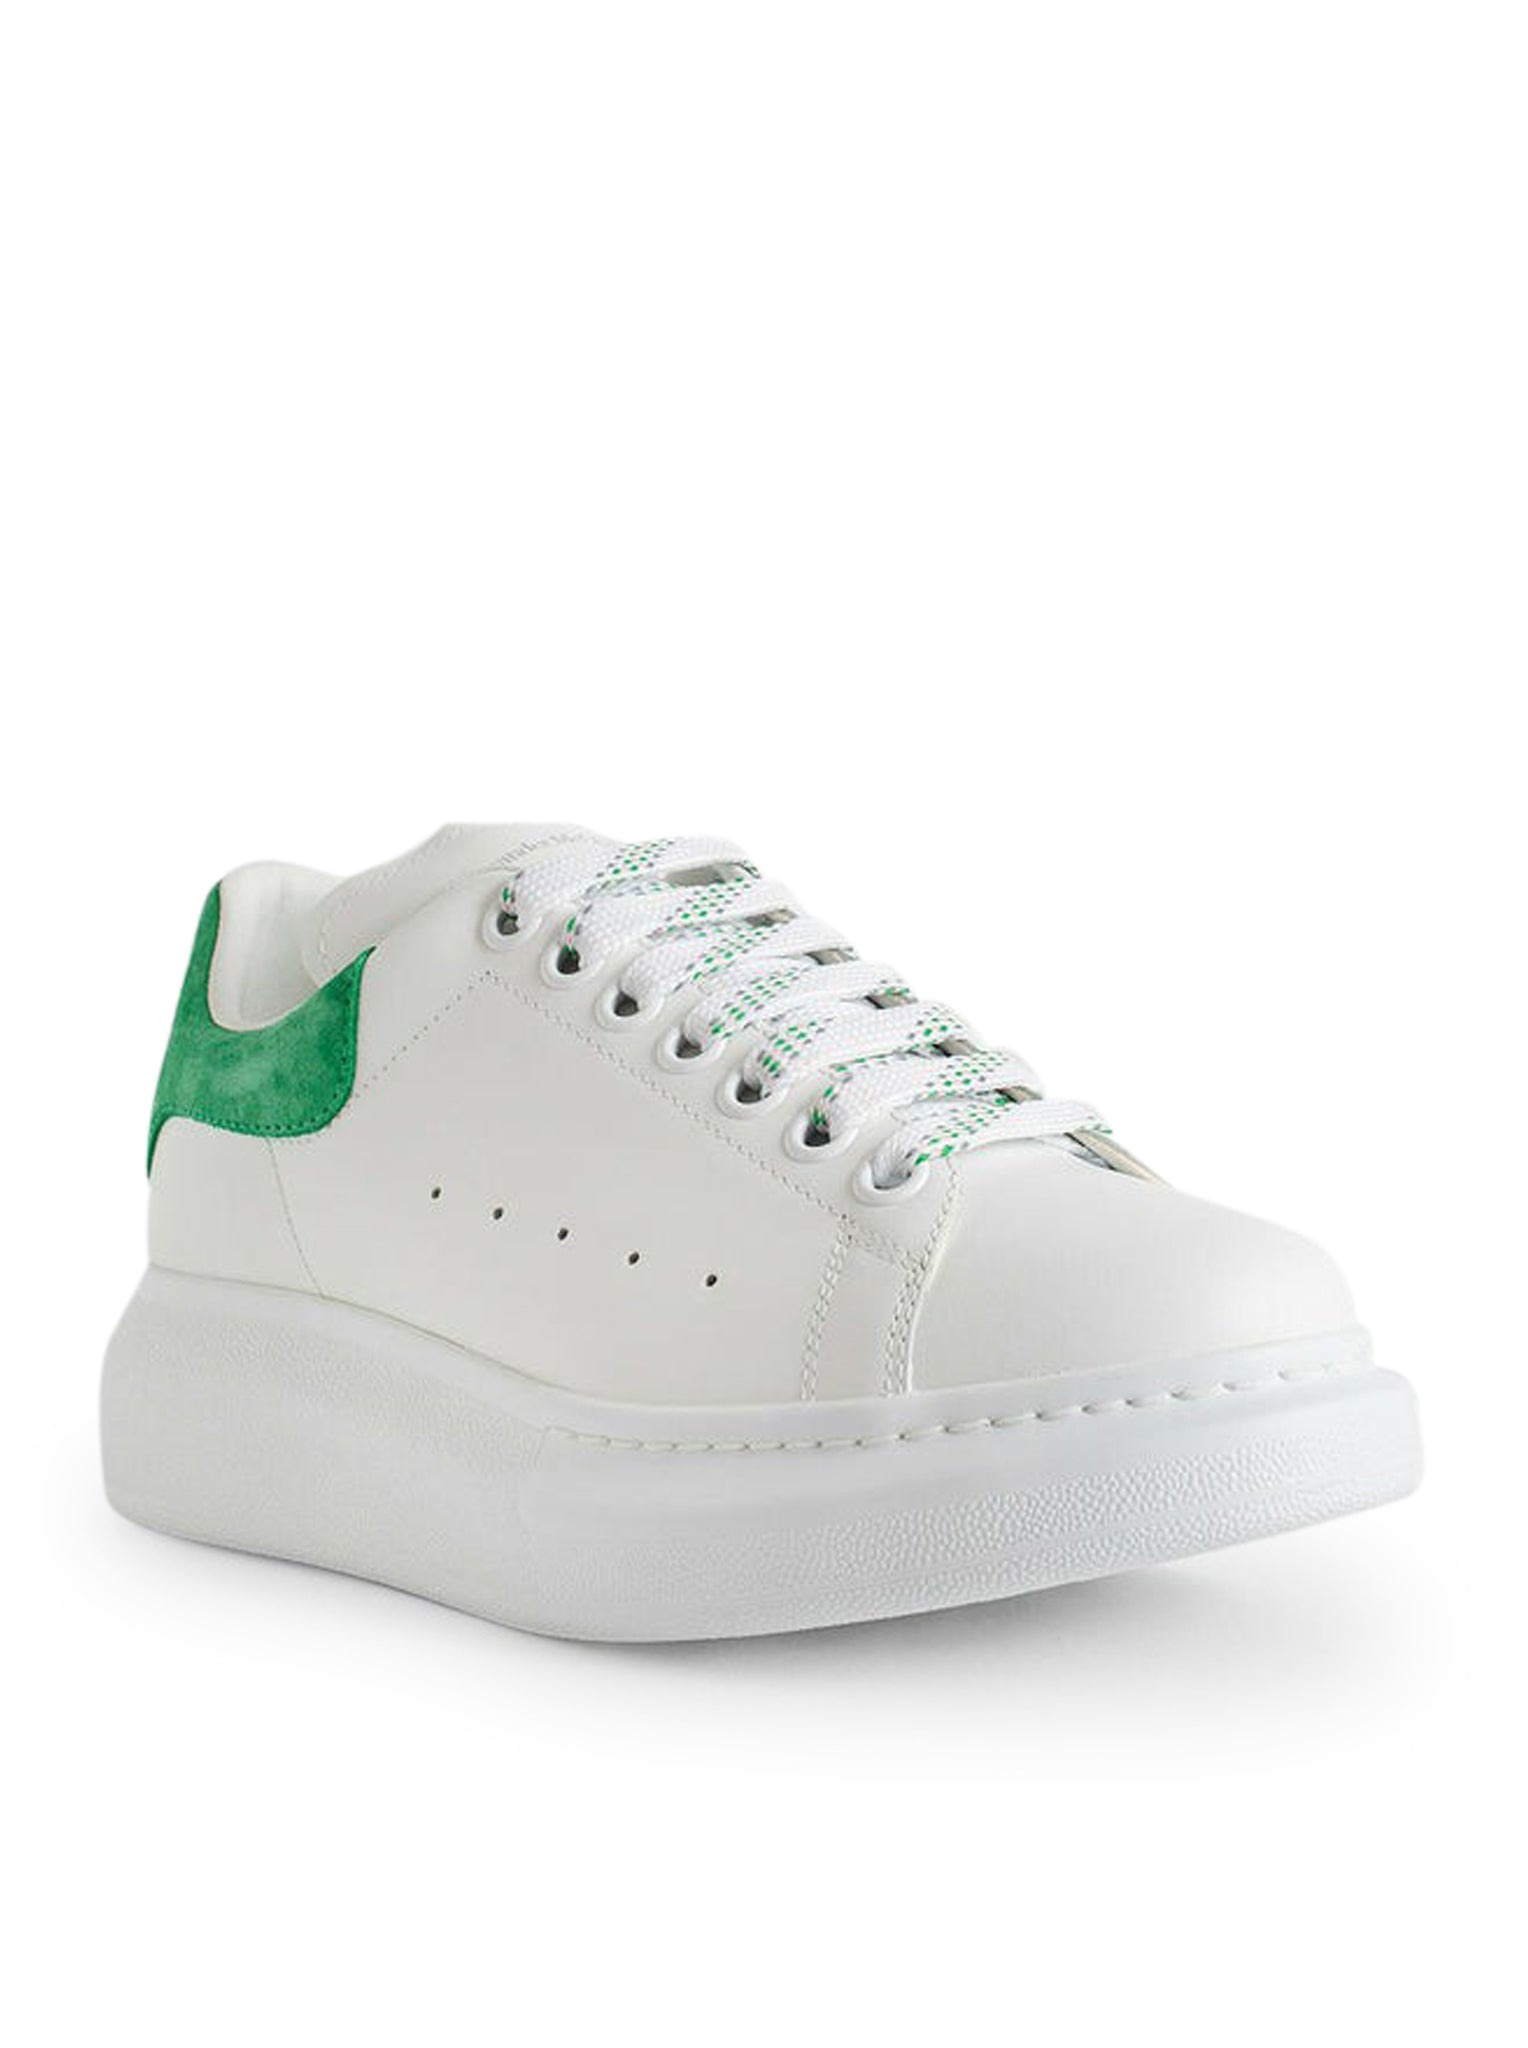 LARRY LEATHER OVERSIZED SNEAKERS